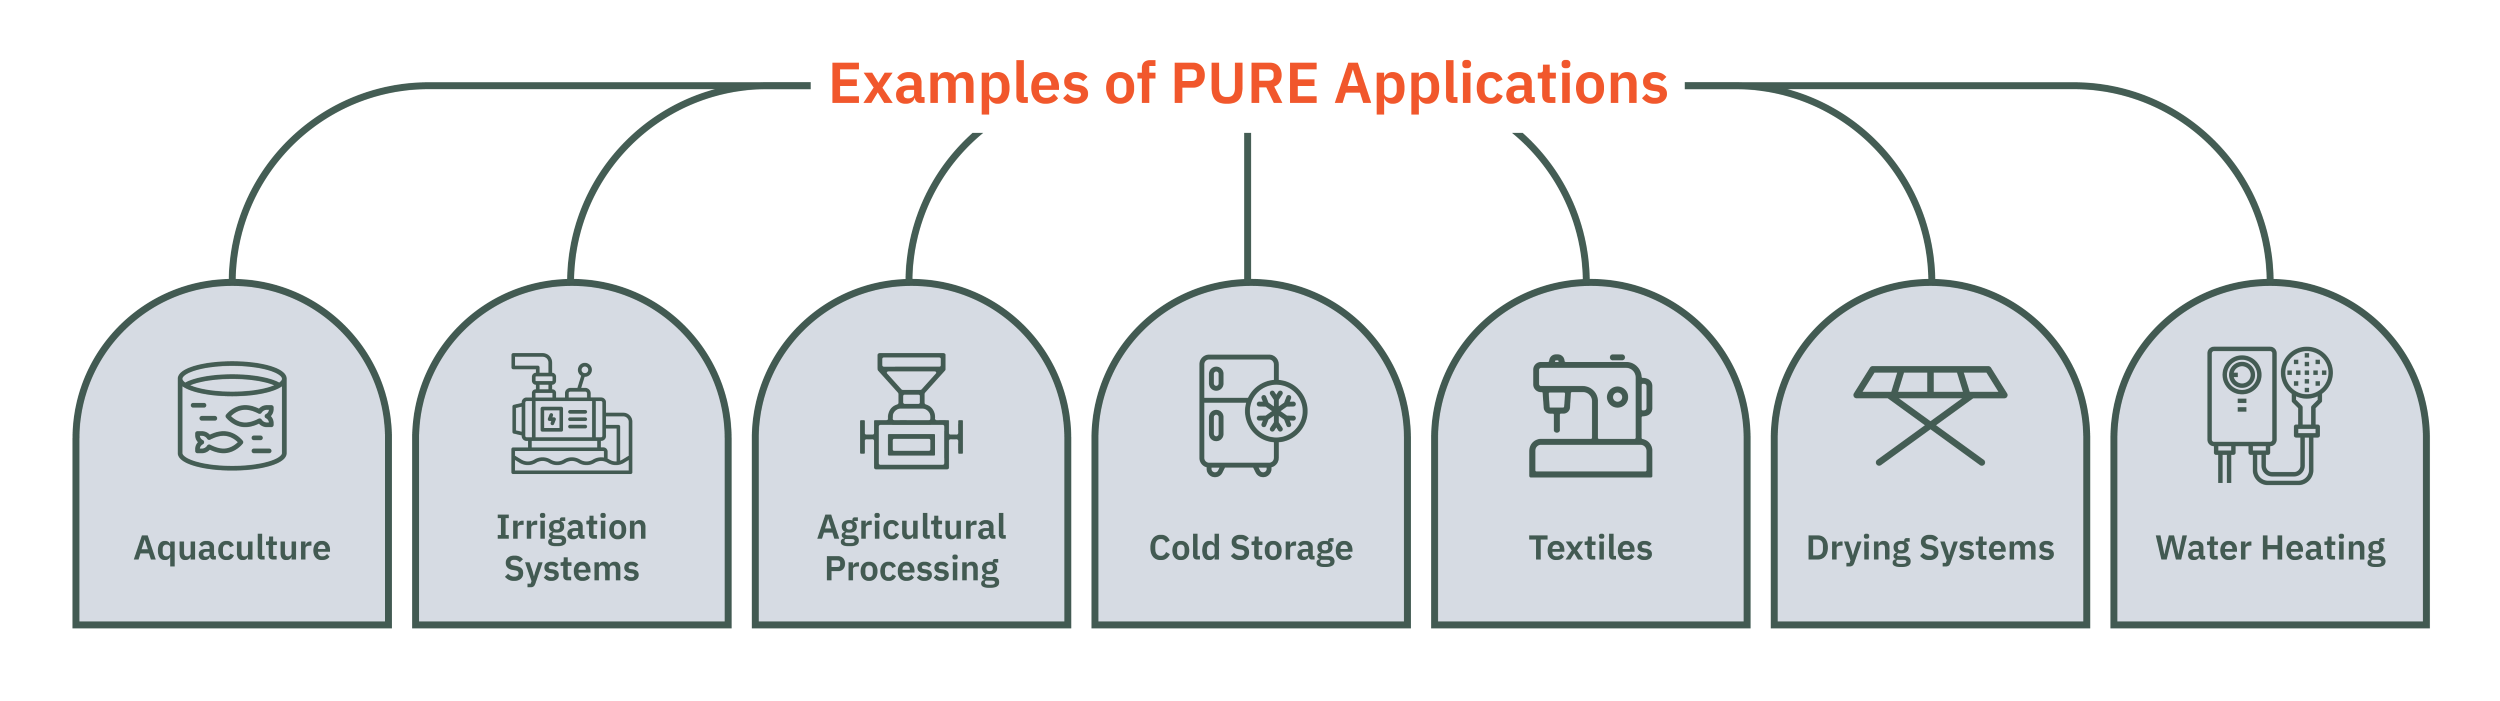 examples of PURE applications